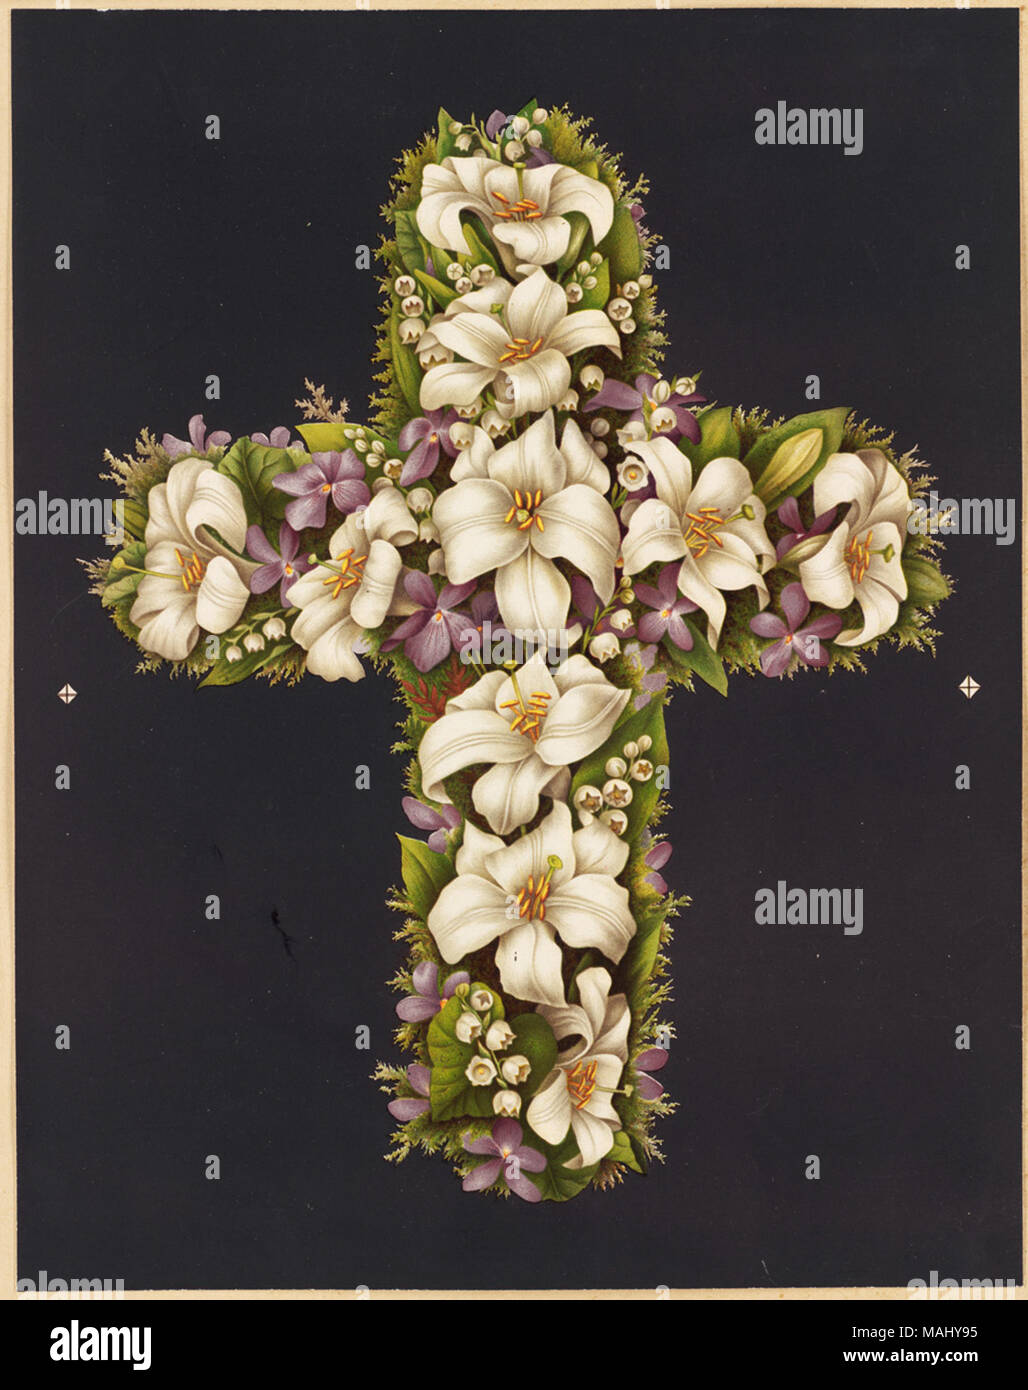 07 11 000537 Title: Easter Lily Cross Creator/Contributor: Whitney, Olive E. (artist); L. Prang & Co. (publisher) Date issued: 1861-1897 (approximate)  Physical description note: Genre: Chromolithographs; Still life prints Location: Boston Public Library,    on 2011-08-07: Camera: Sinar AG Sinarback 54 FW, Sinar m Stock Photo